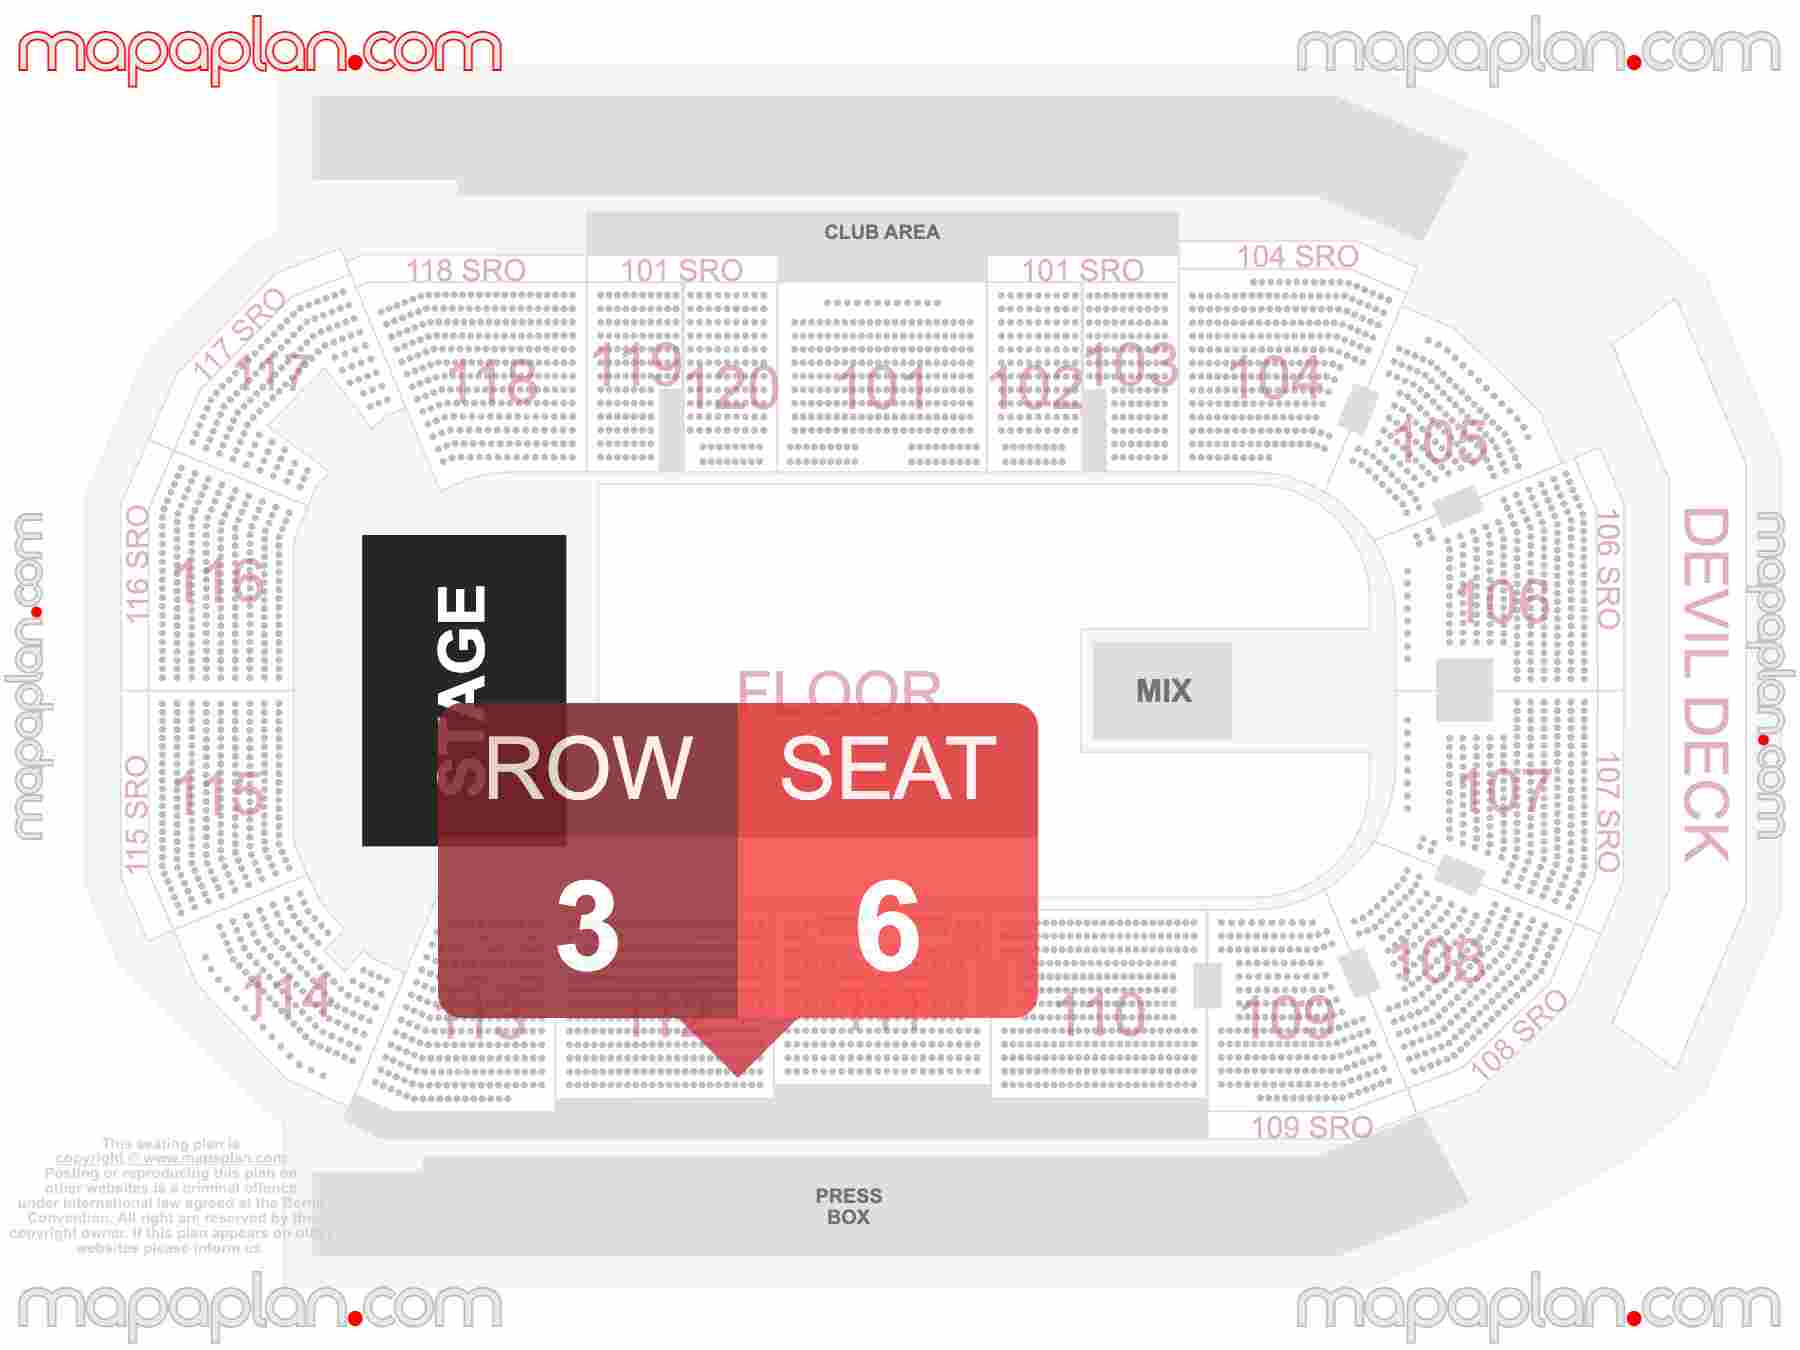 Tempe Mullett Arena seating chart Concert with floor general admission standing room only seating chart with exact section numbers showing best rows and seats selection 3d layout - Best interactive seat finder tool with precise detailed location data